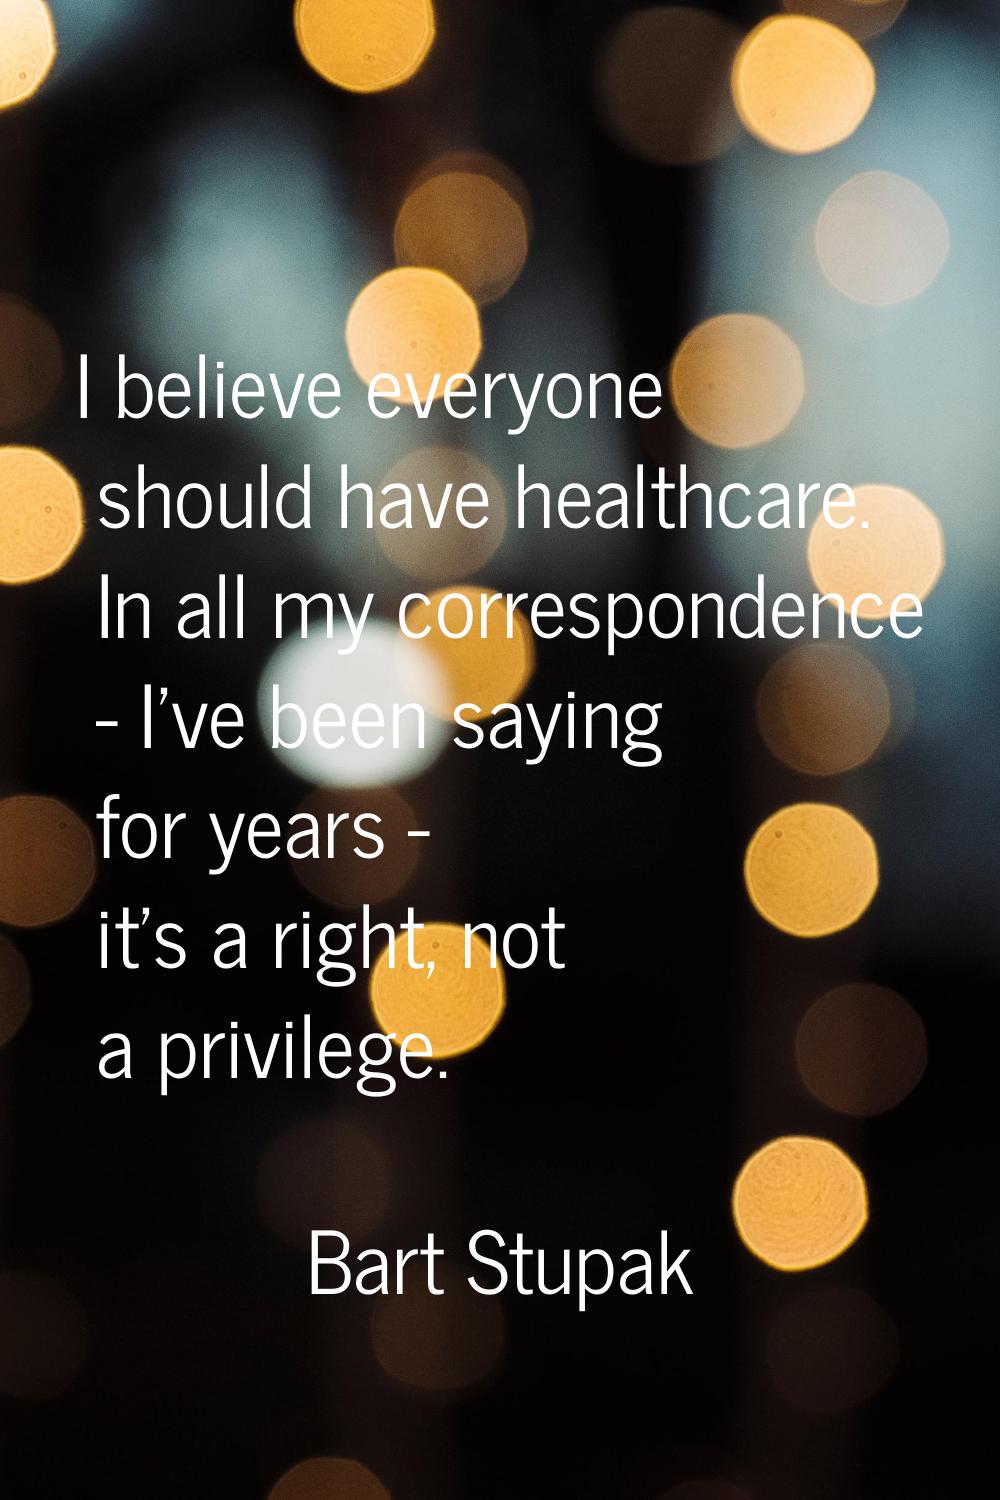 I believe everyone should have healthcare. In all my correspondence - I've been saying for years - 